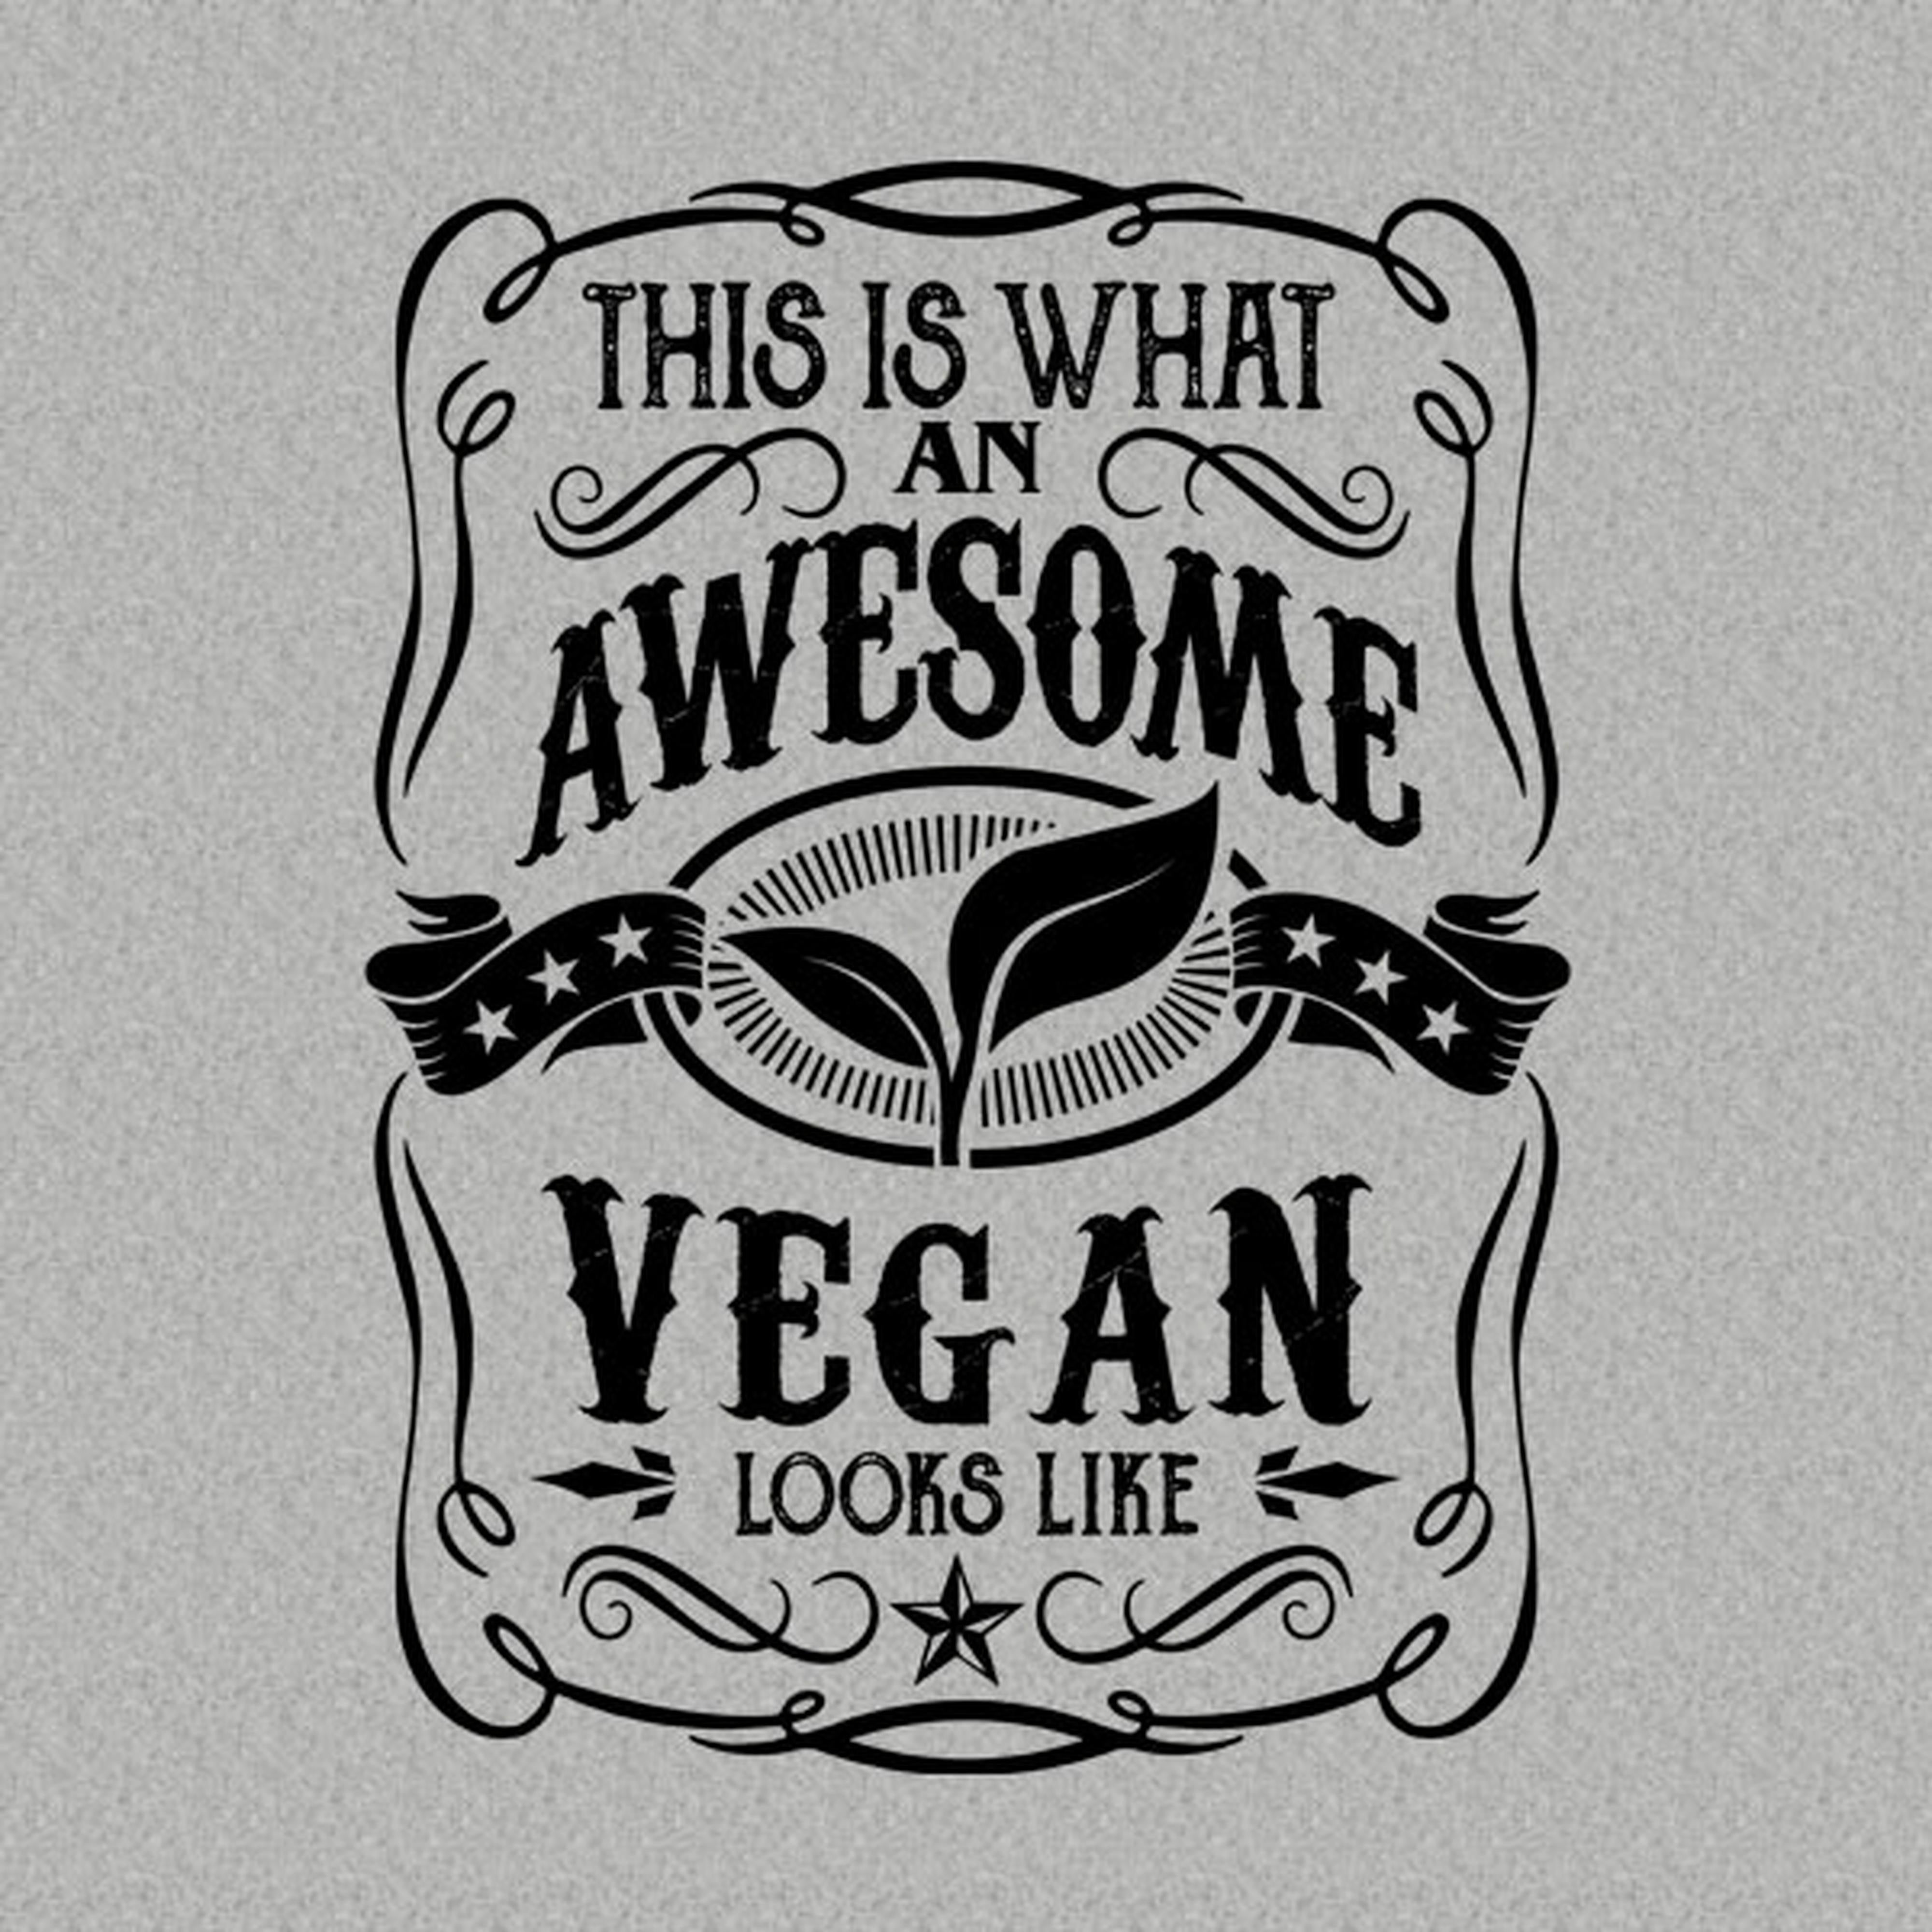 This is what an awesome vegan looks like - T-shirt